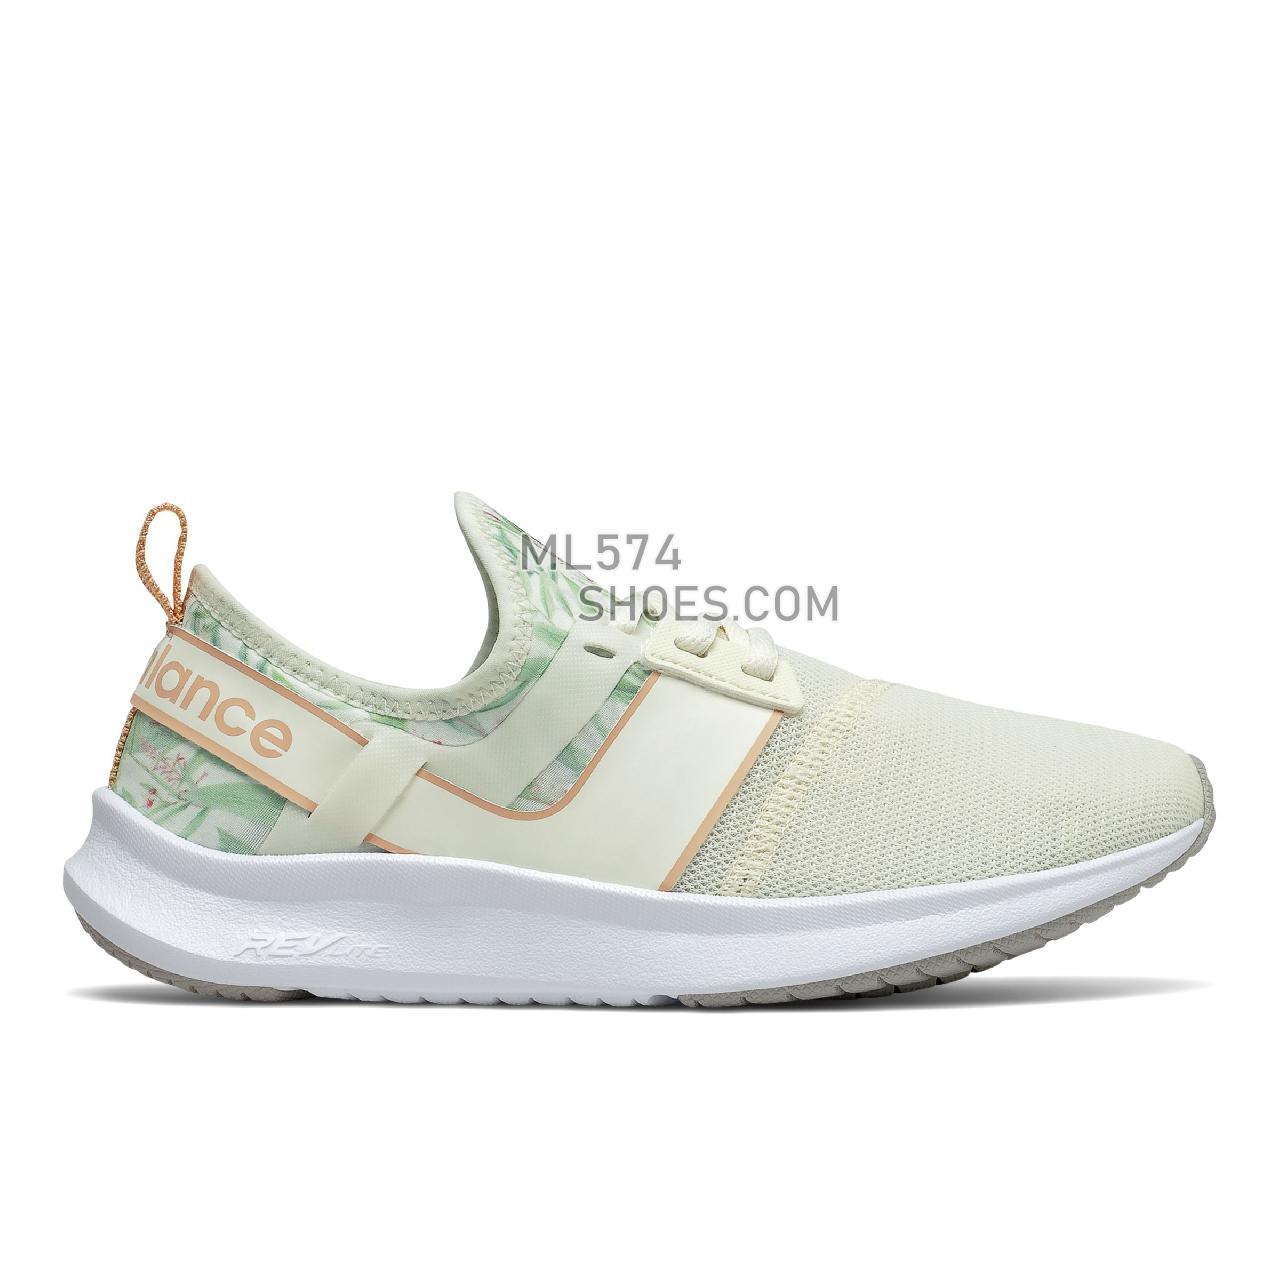 New Balance NB Nergize Sport - Women's Sport Style Sneakers - Sea Salt with Rose Water - WNRGSBA1